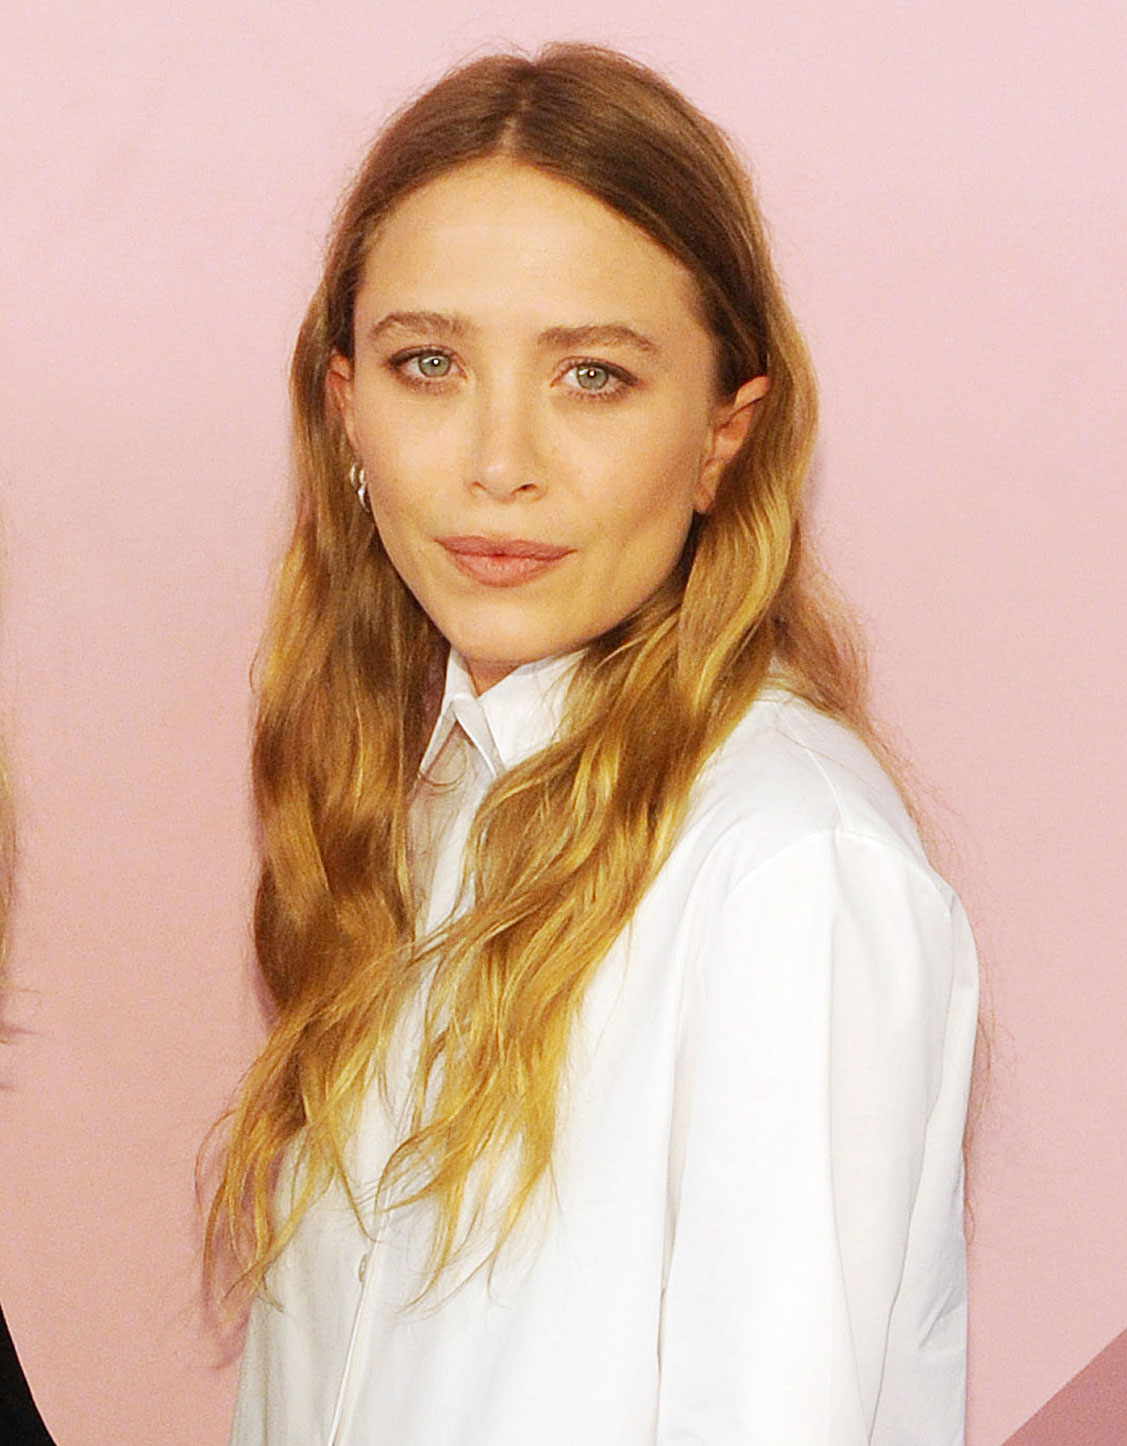 Mary-Kate Olsen at CFDA Fashion Awards 2017 Mary-Kate Olsen Sparks Dating Rumors With Brightwire CEO John Cooper 5 Things to Know